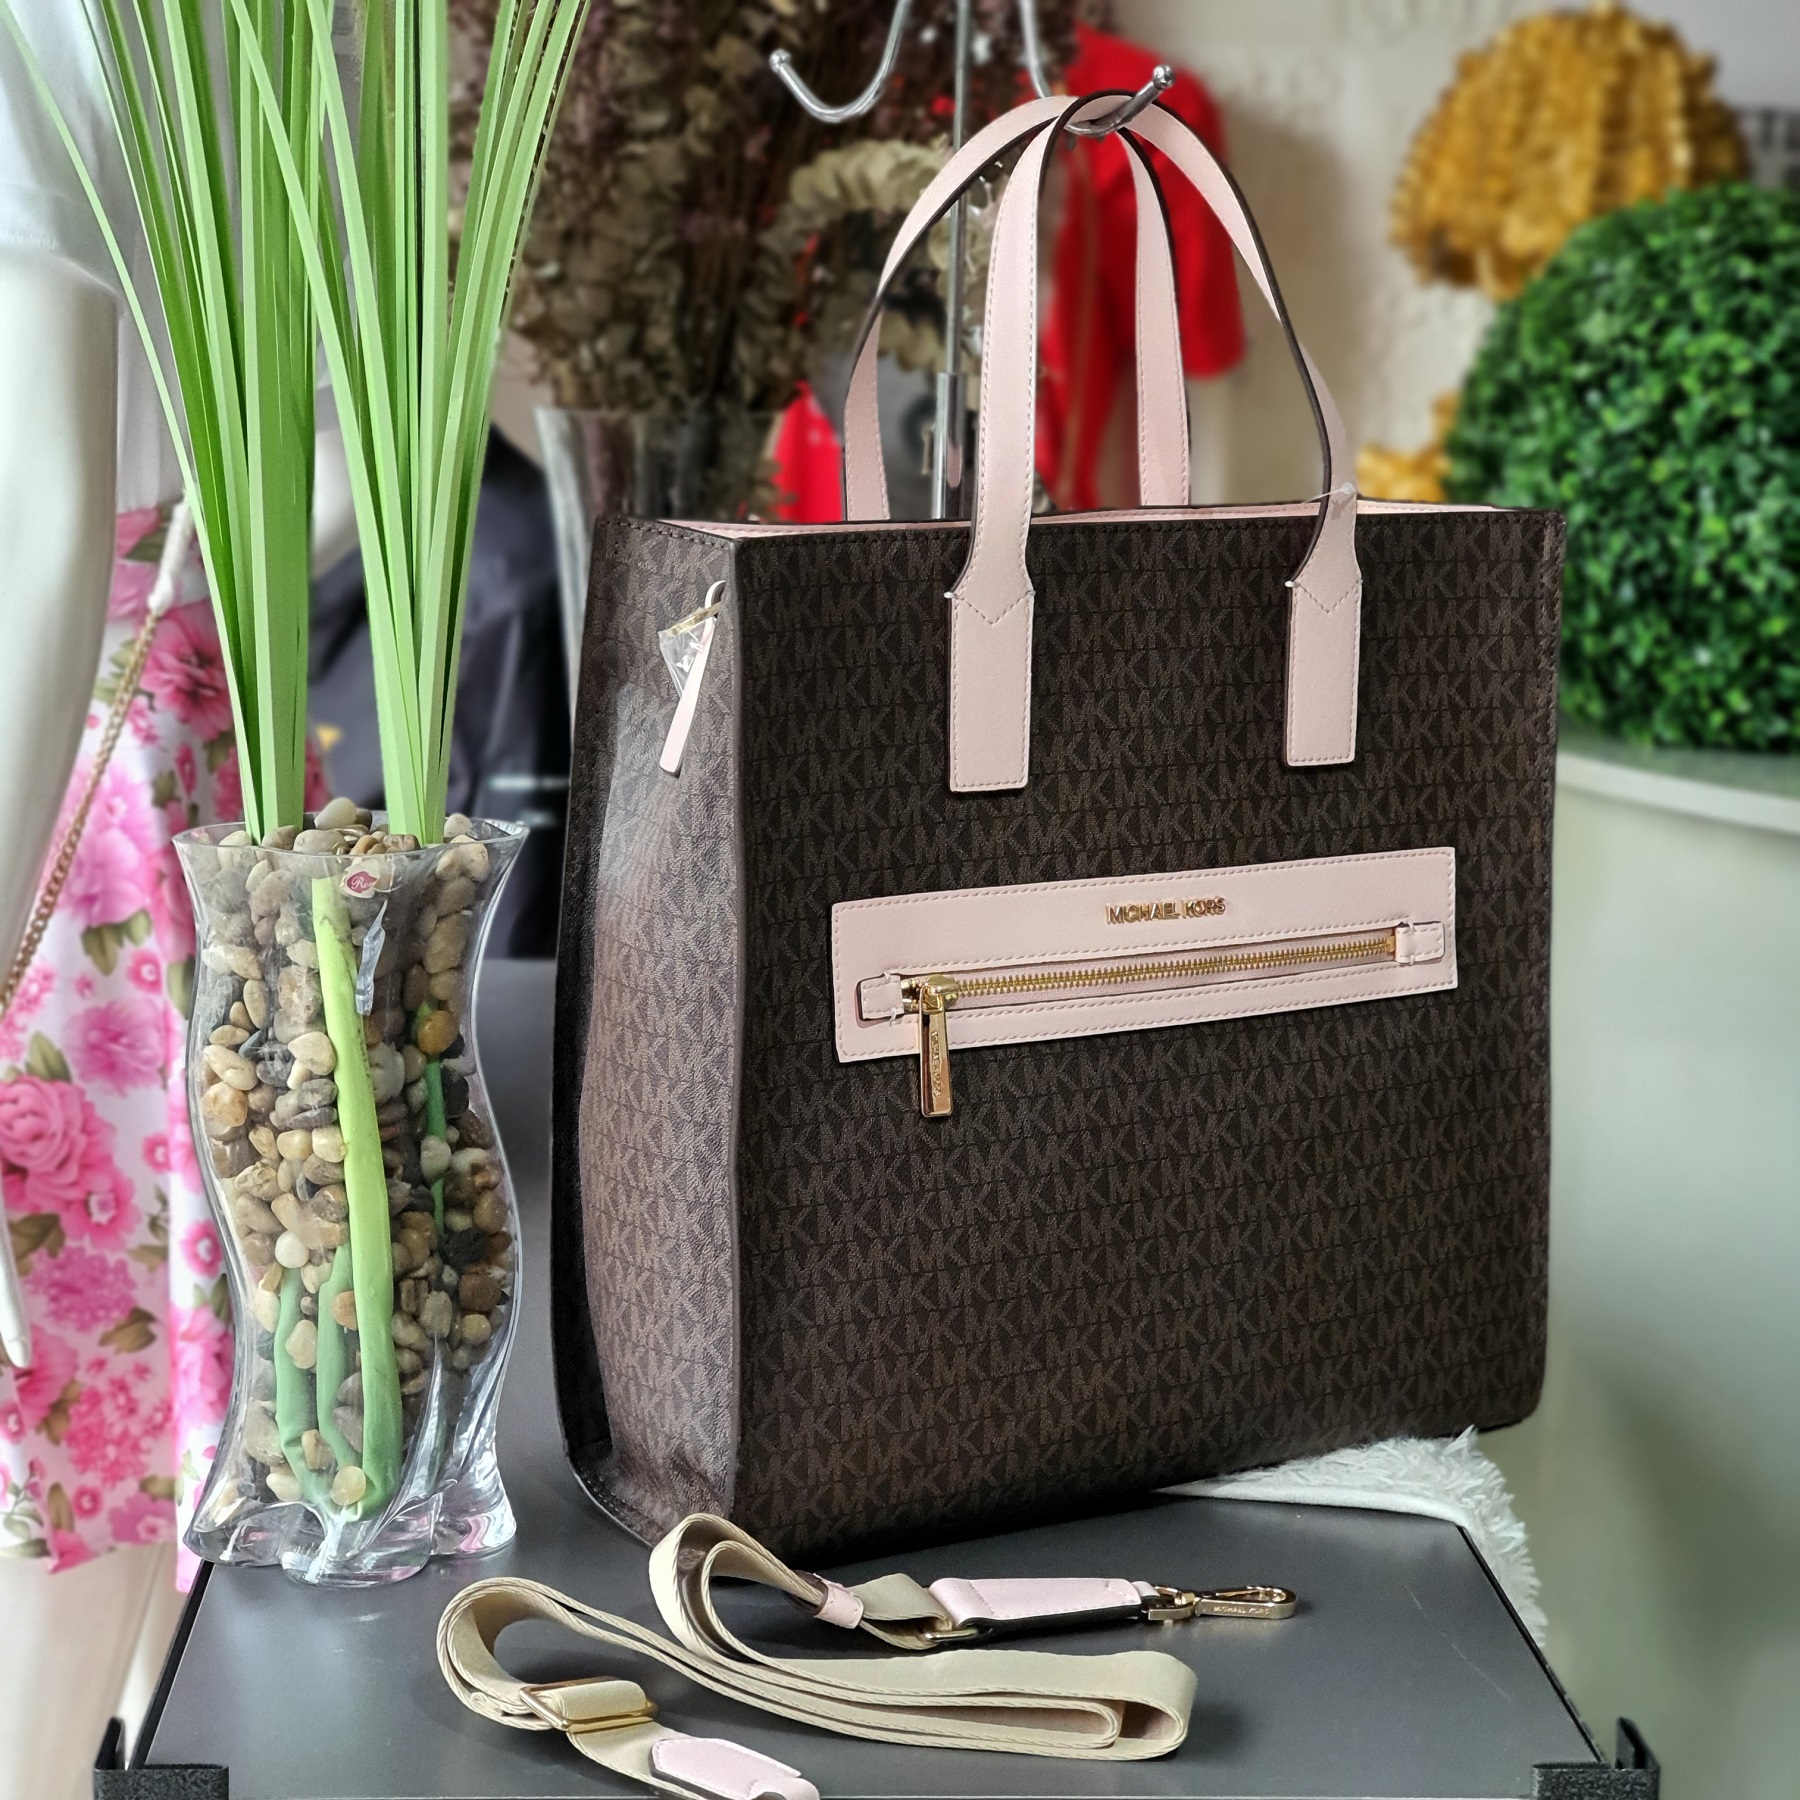 DEFECT ITEM] Michael Kors Kenly Large North South Tote in Black - USA  Loveshoppe